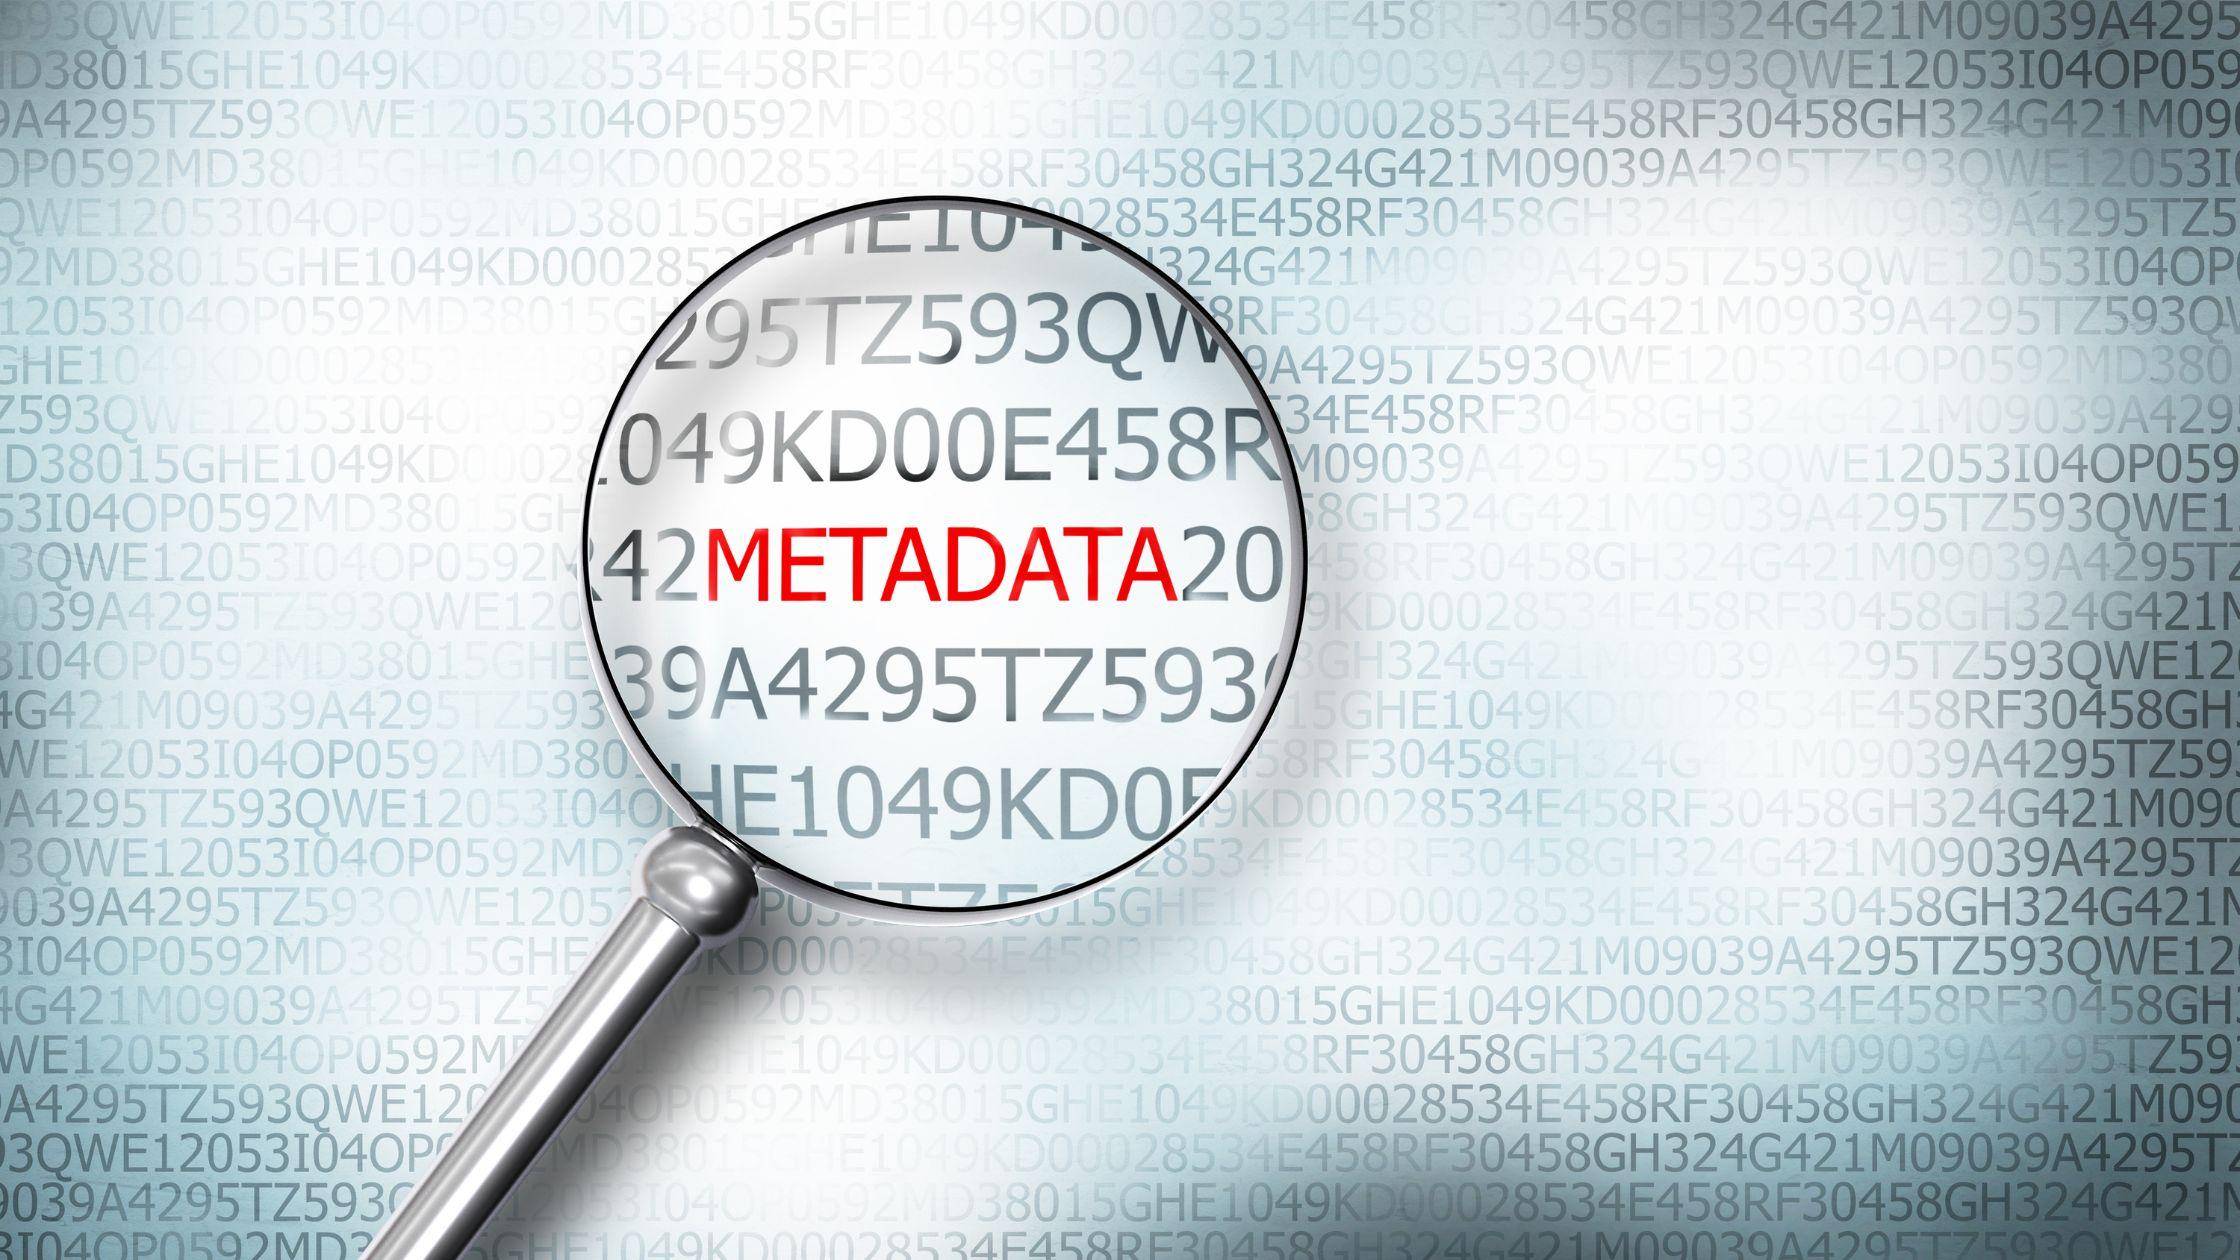 What is Metadata? How can it be useful in Cyber Forensics?